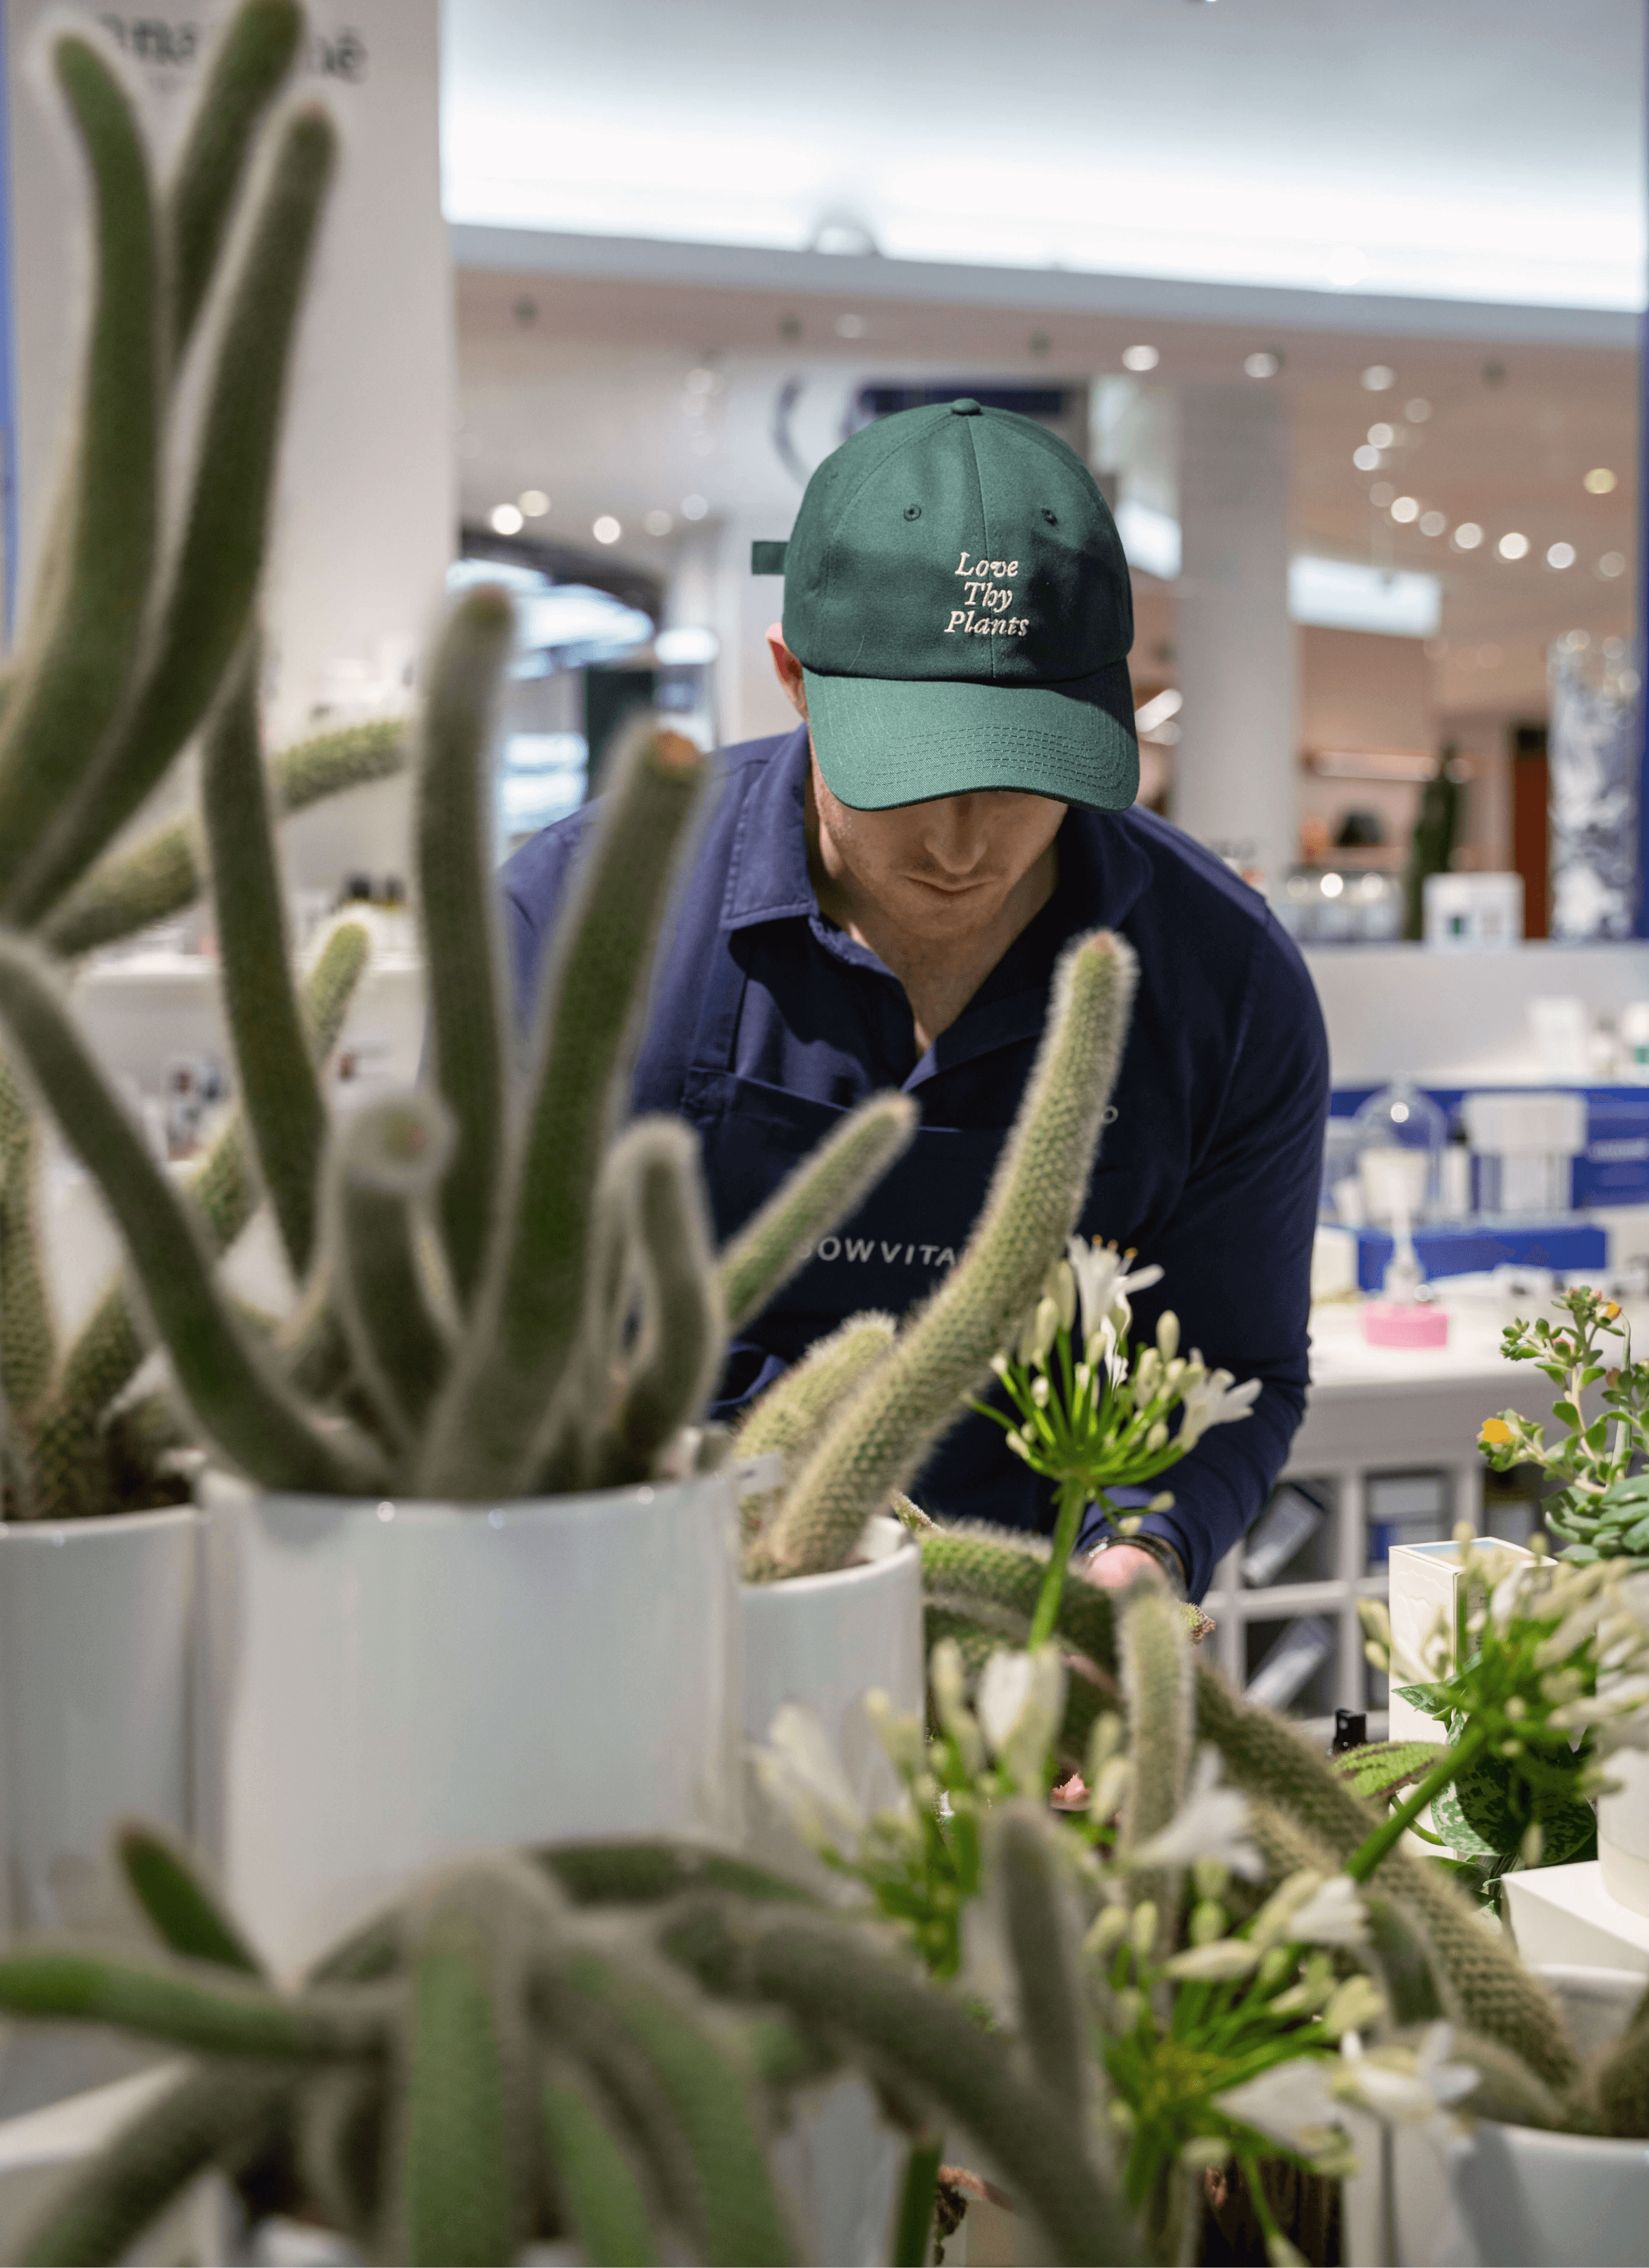 A staff member wearing a green Love Thy Plants cap and a black apron adorned with the Sowvital label tends to a collection of potted plants, flowers, and cacti. With care and attention, they nurture the botanical display, ensuring each plant thrives in its environment.